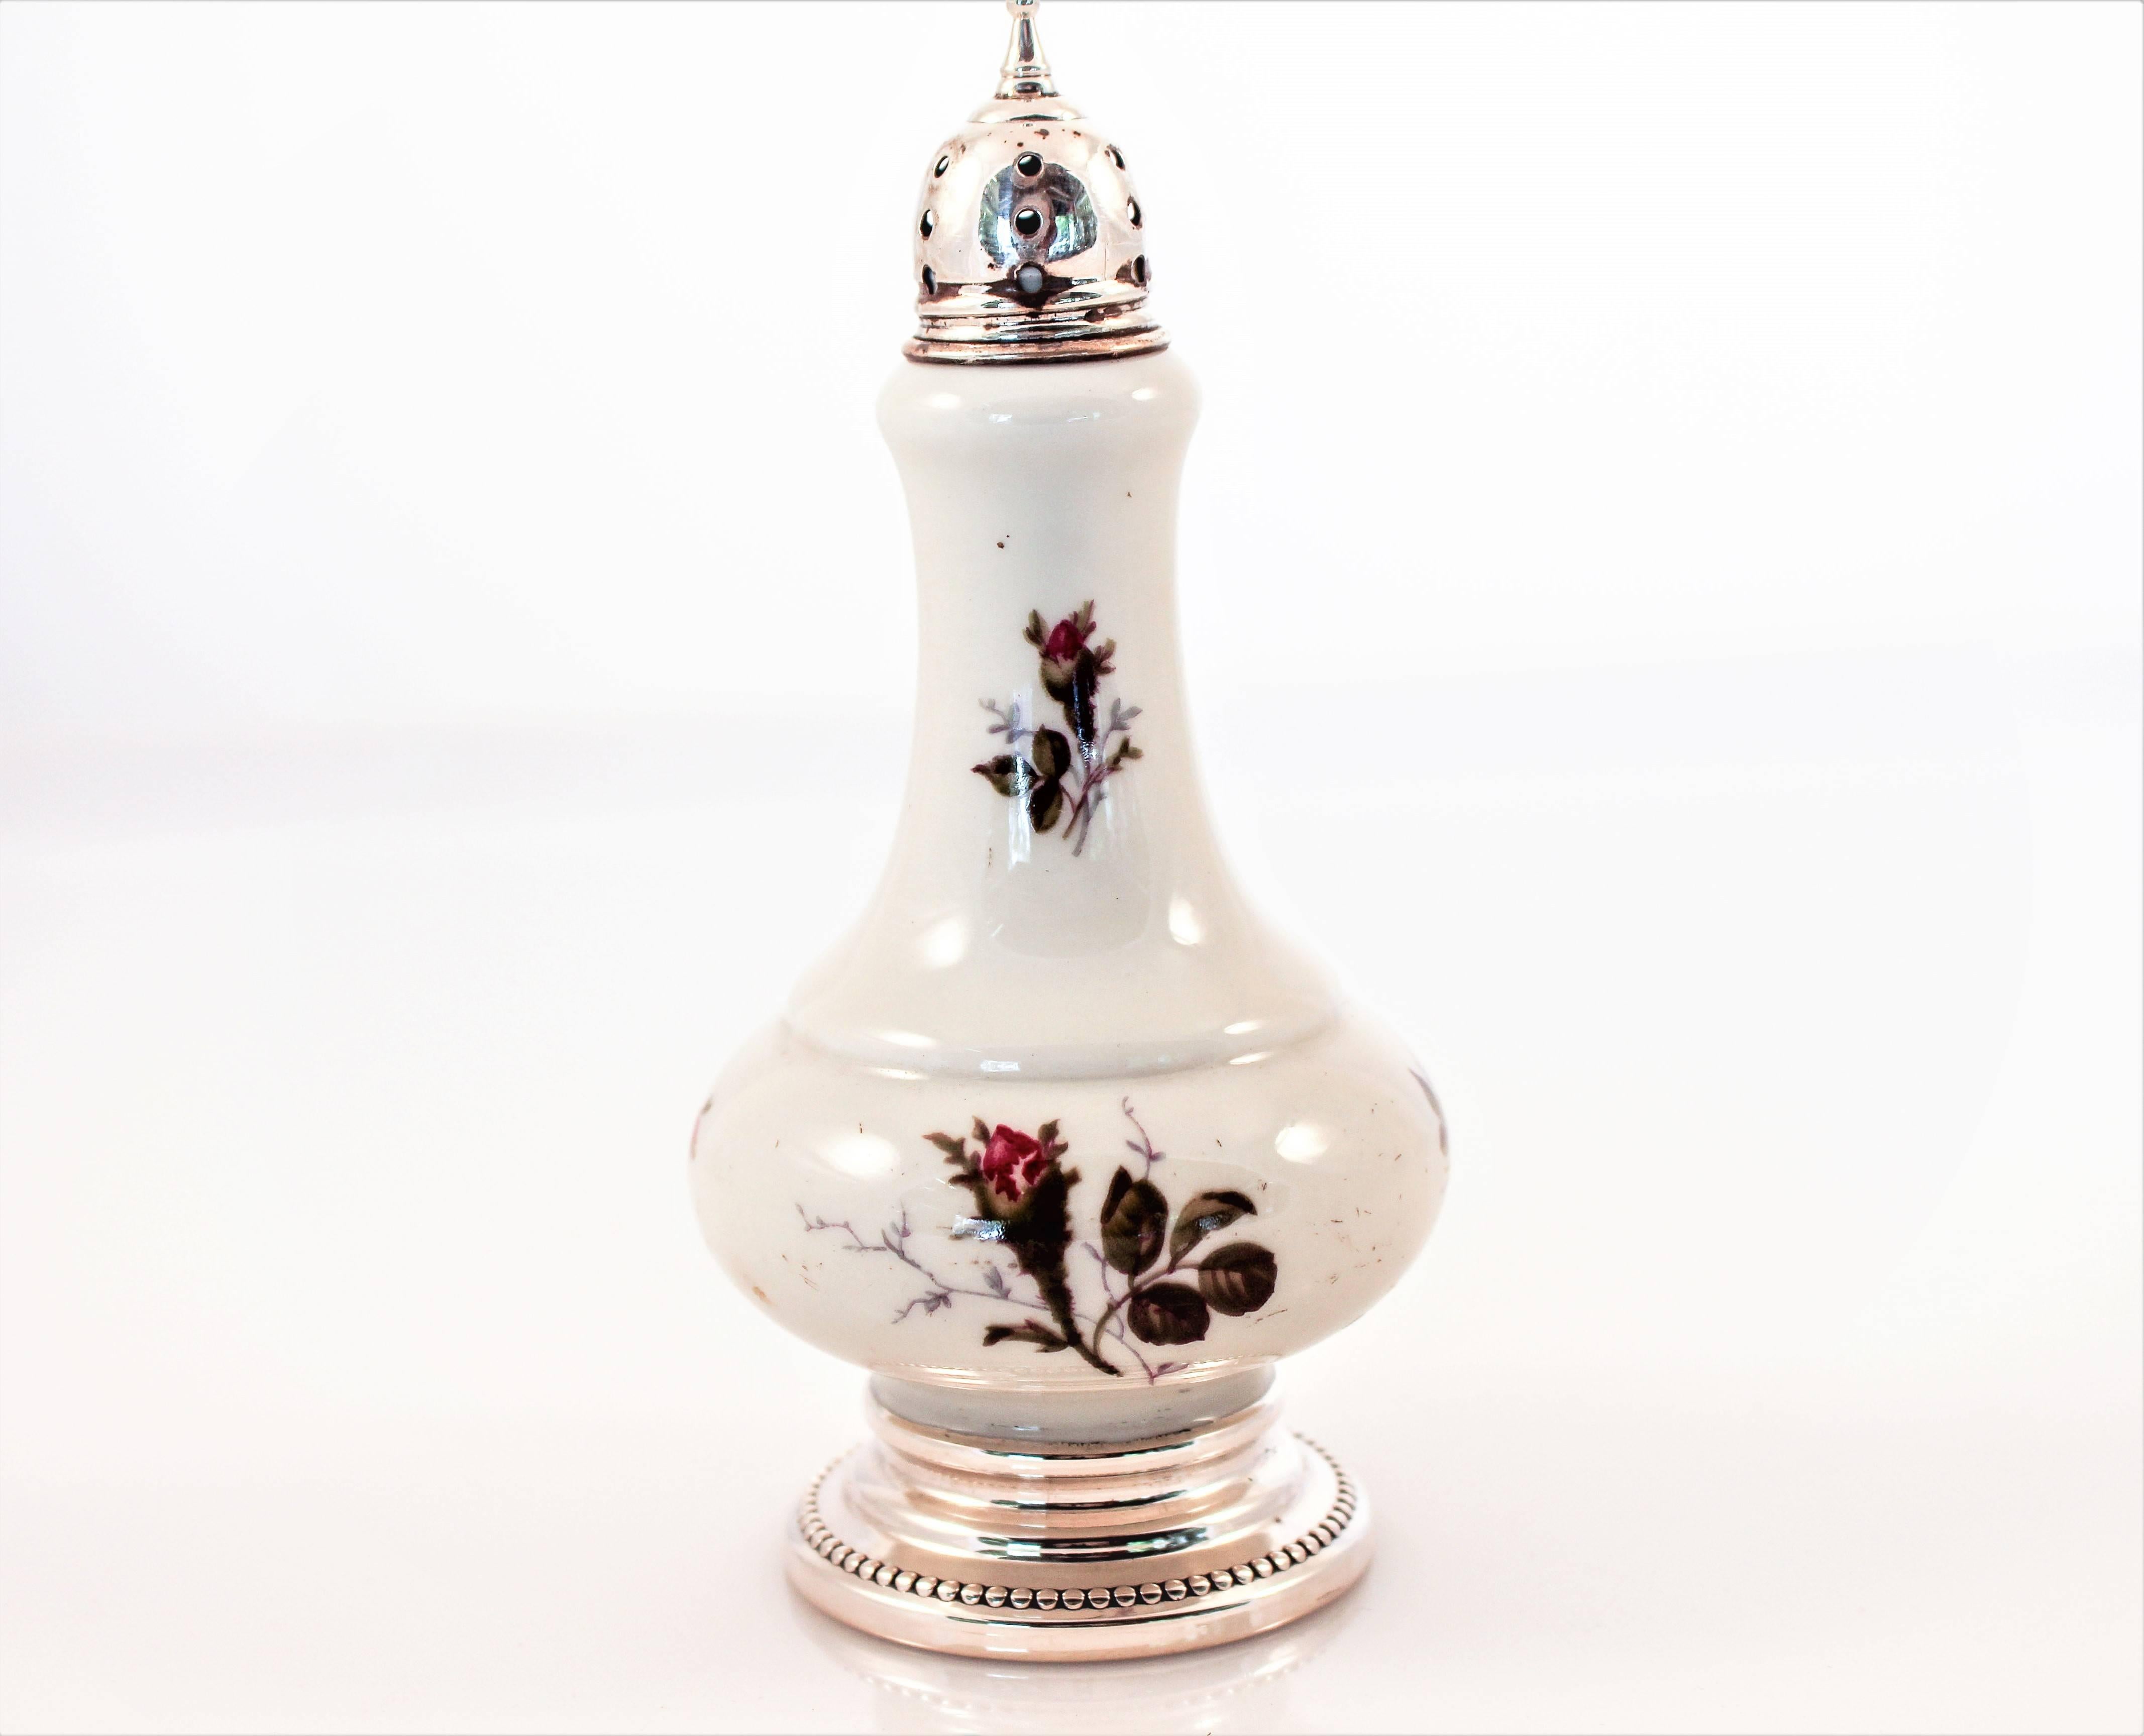 A moss-rose pattern decorates these delicate salt and pepper shakers, both around the belly and neck. Deep shades of green and red against the antique-white background really stand-out.